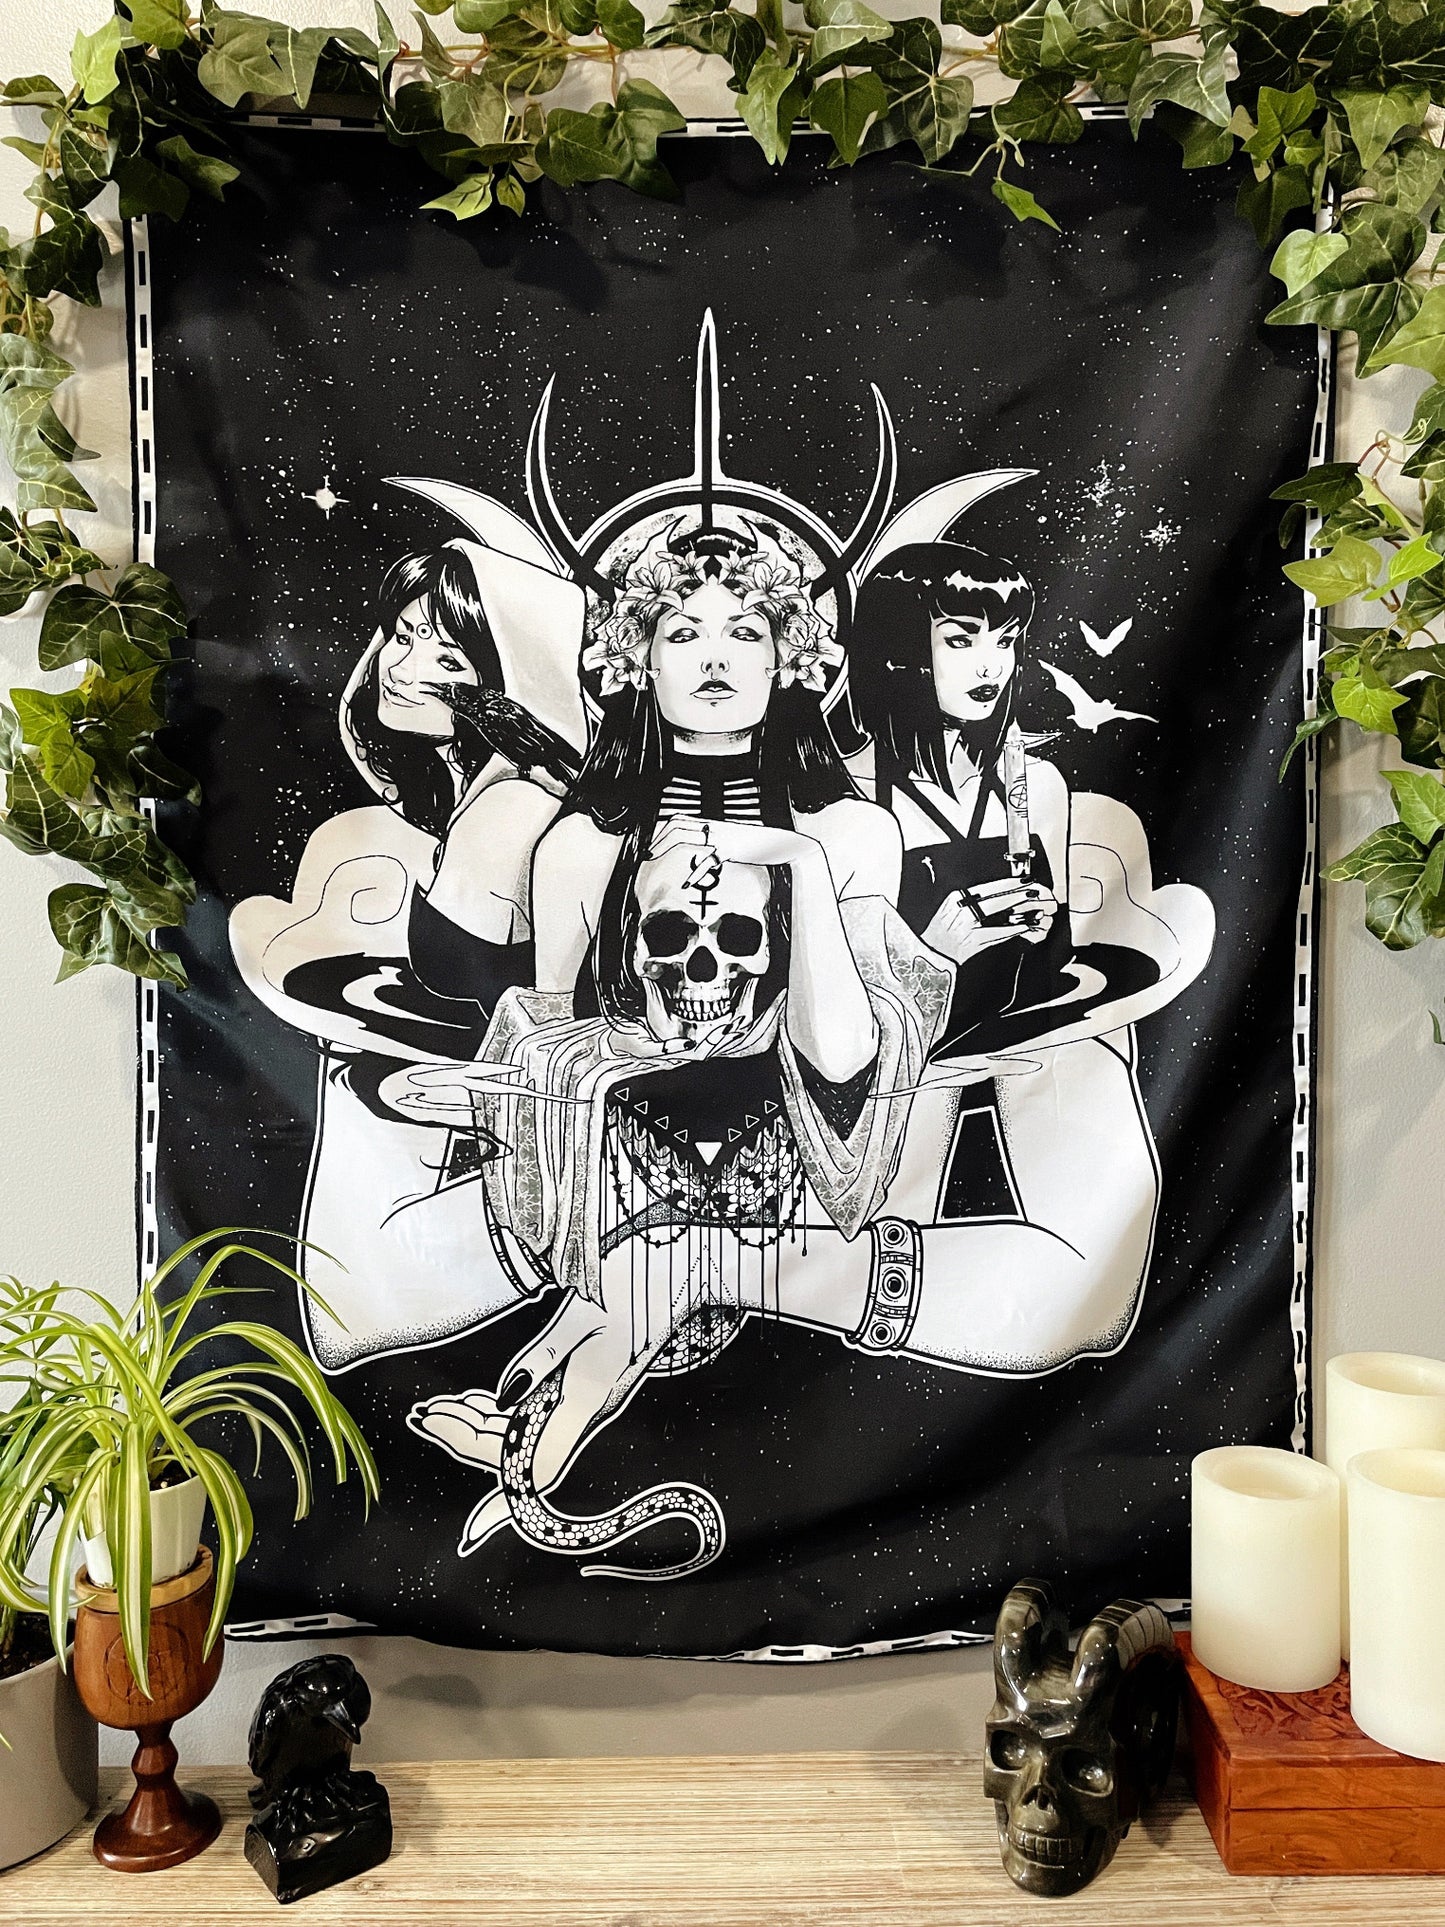 Pictured is a large wall tapestry with a black background and three women representing triple goddesses or Hecate printed in white on it.